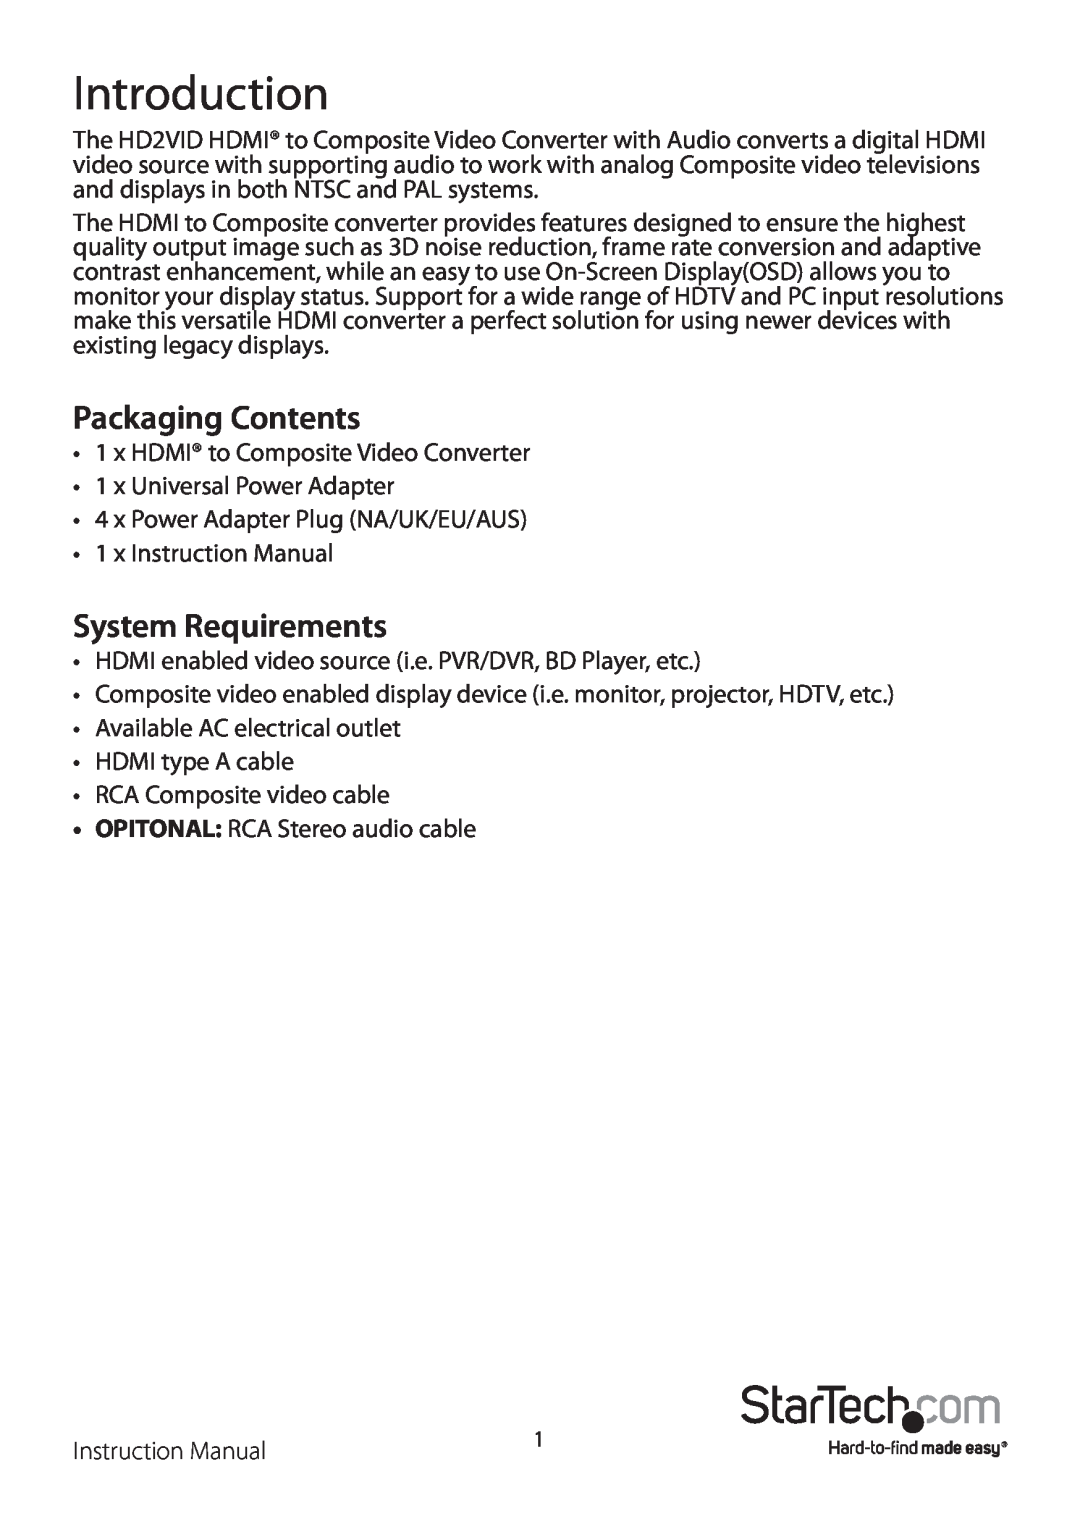 StarTech.com HD2VID manual Introduction, Packaging Contents, System Requirements 